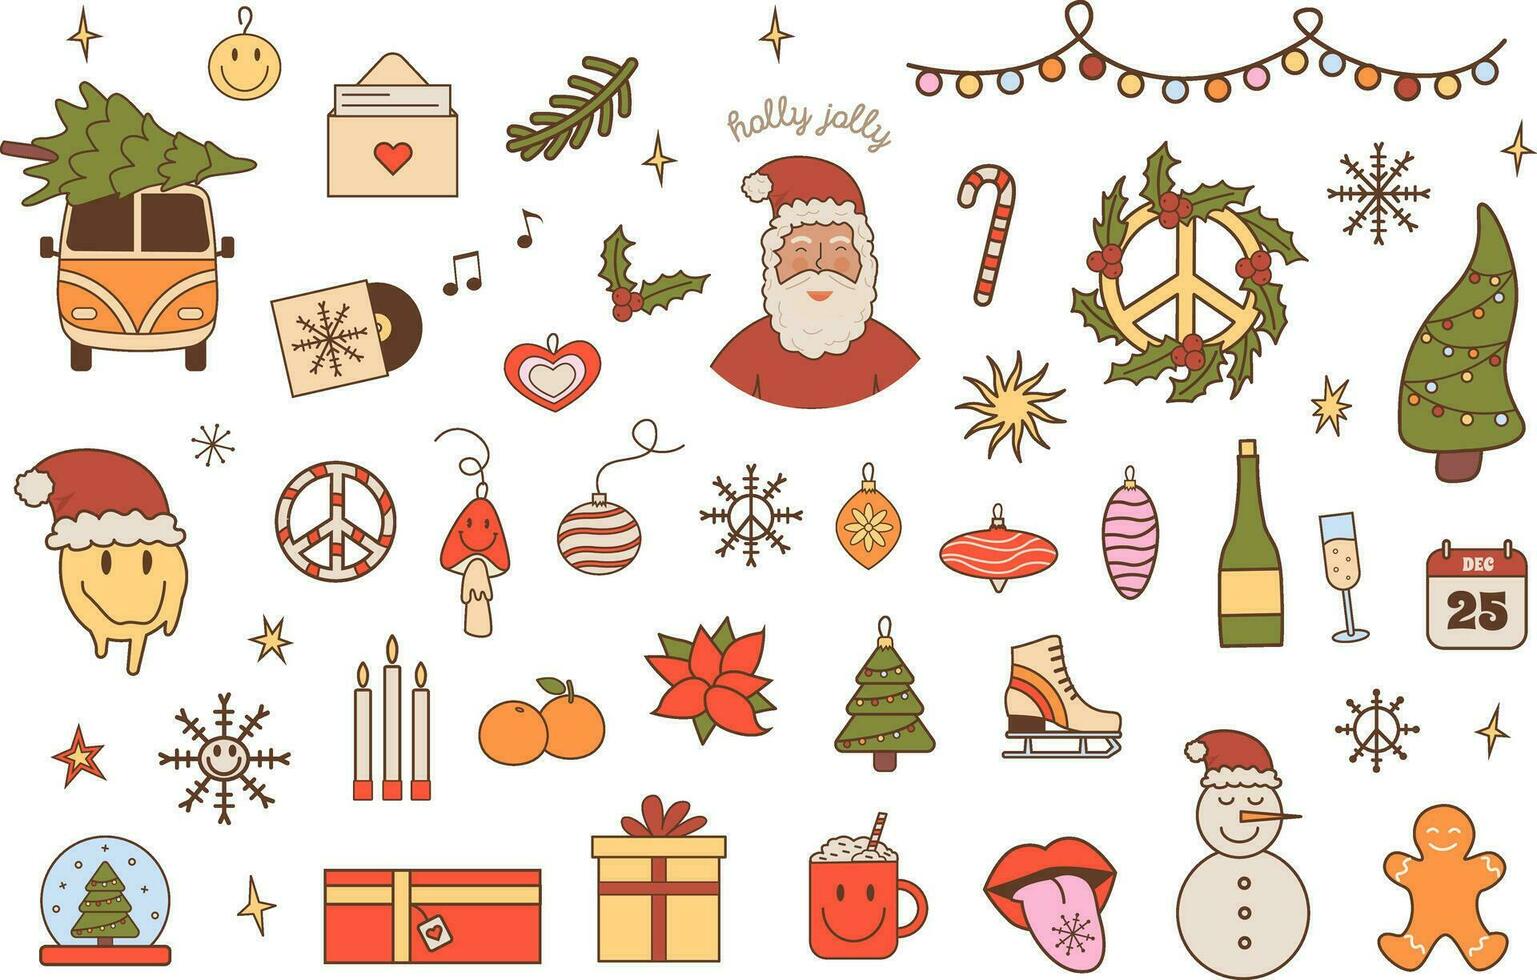 Merry Christmas and happy New Year vector collection in 60s 70s retro style. Groovy winter holiday elements. Sticker pack with positive hippie xmas icons. Vector illustration isolated on white.